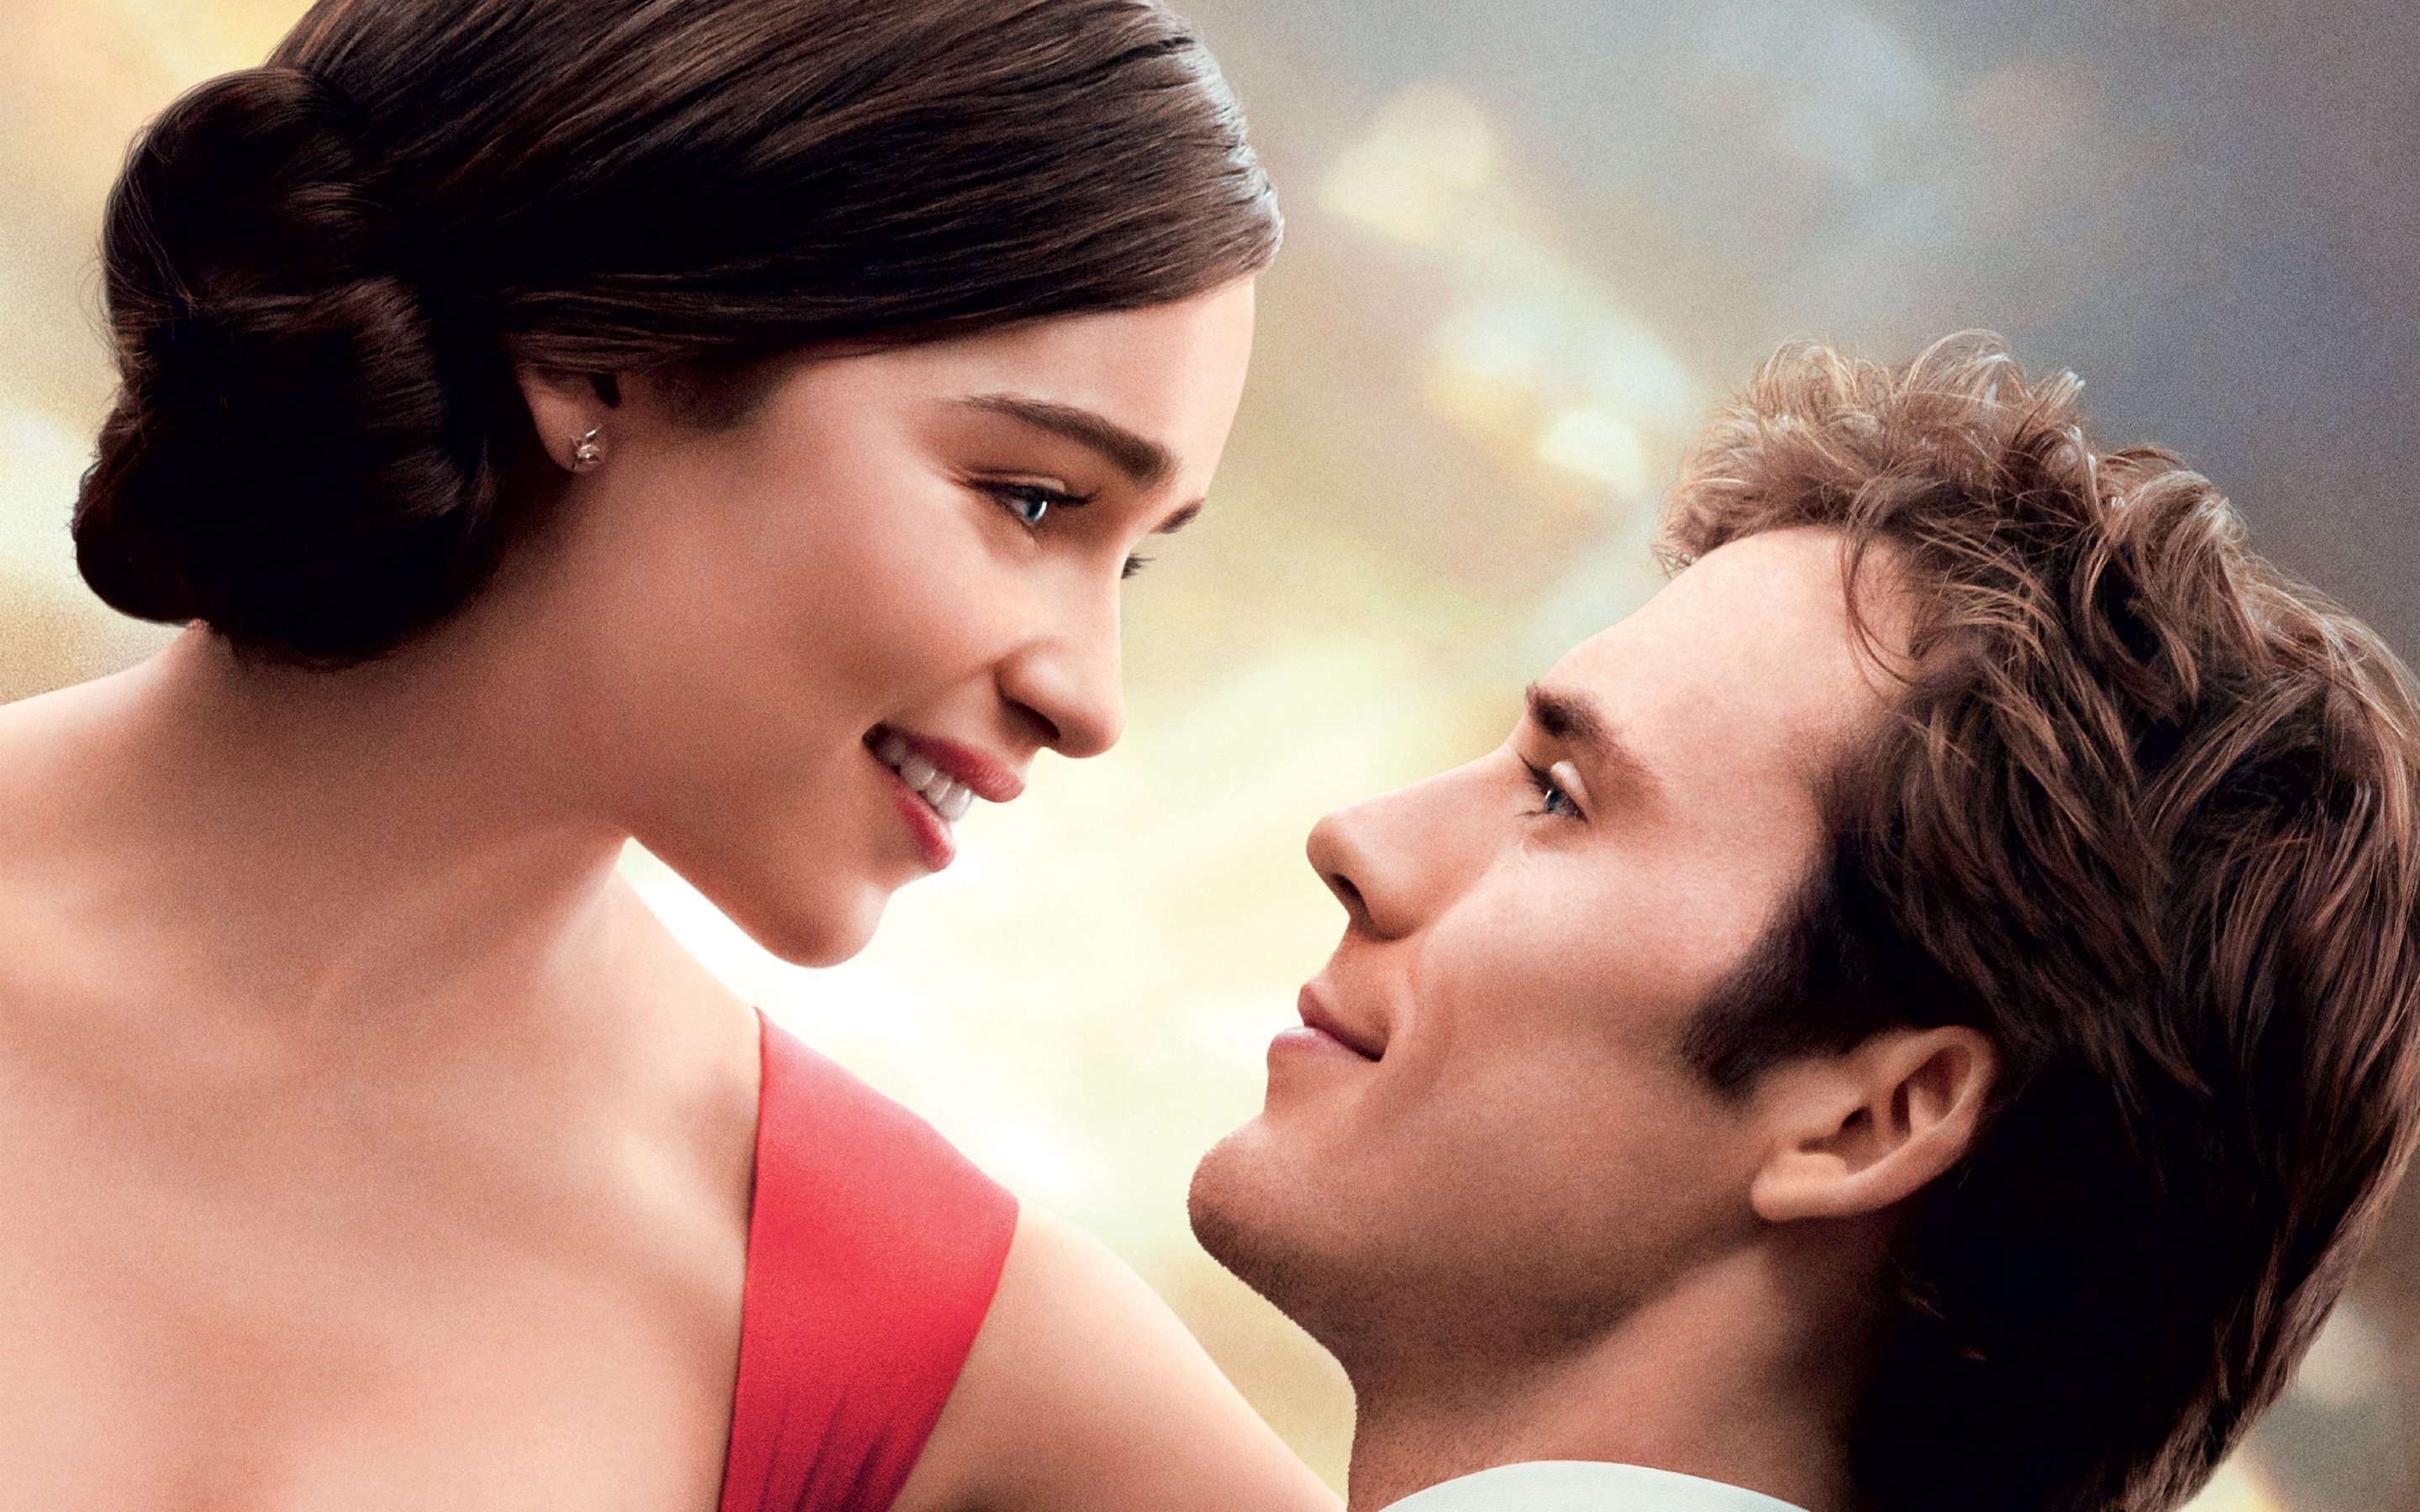 Sam Claflin: Starring role of Will Traynor in the romantic film Me Before You, 2016. 2880x1800 HD Background.